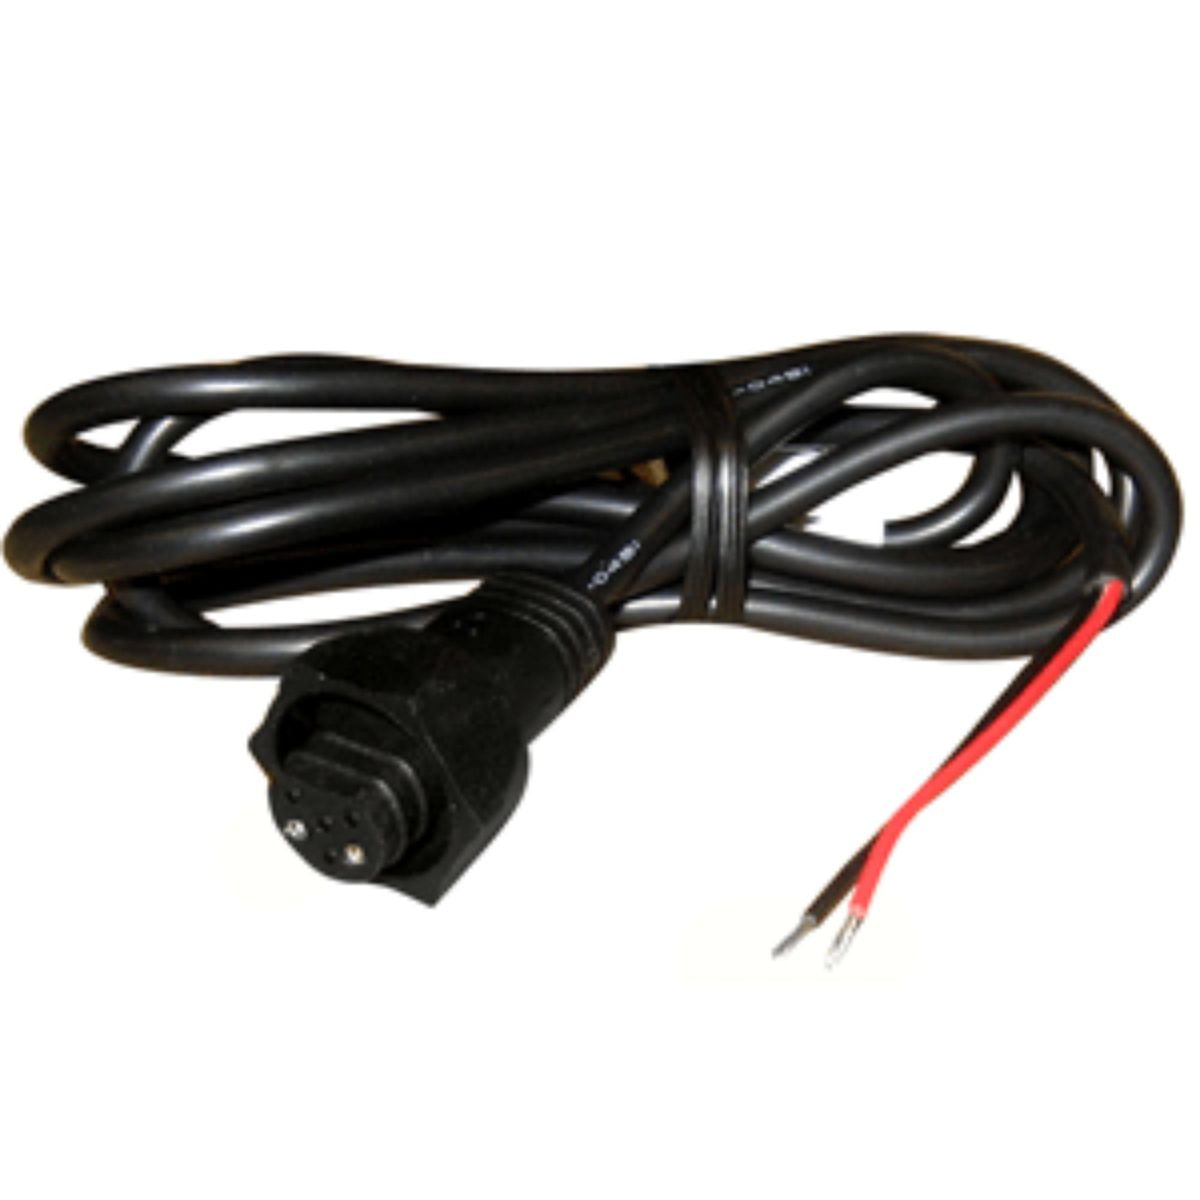 Hook Power Cable 000-14041-001 2-Wire for Lowrance HDS HDI Elite